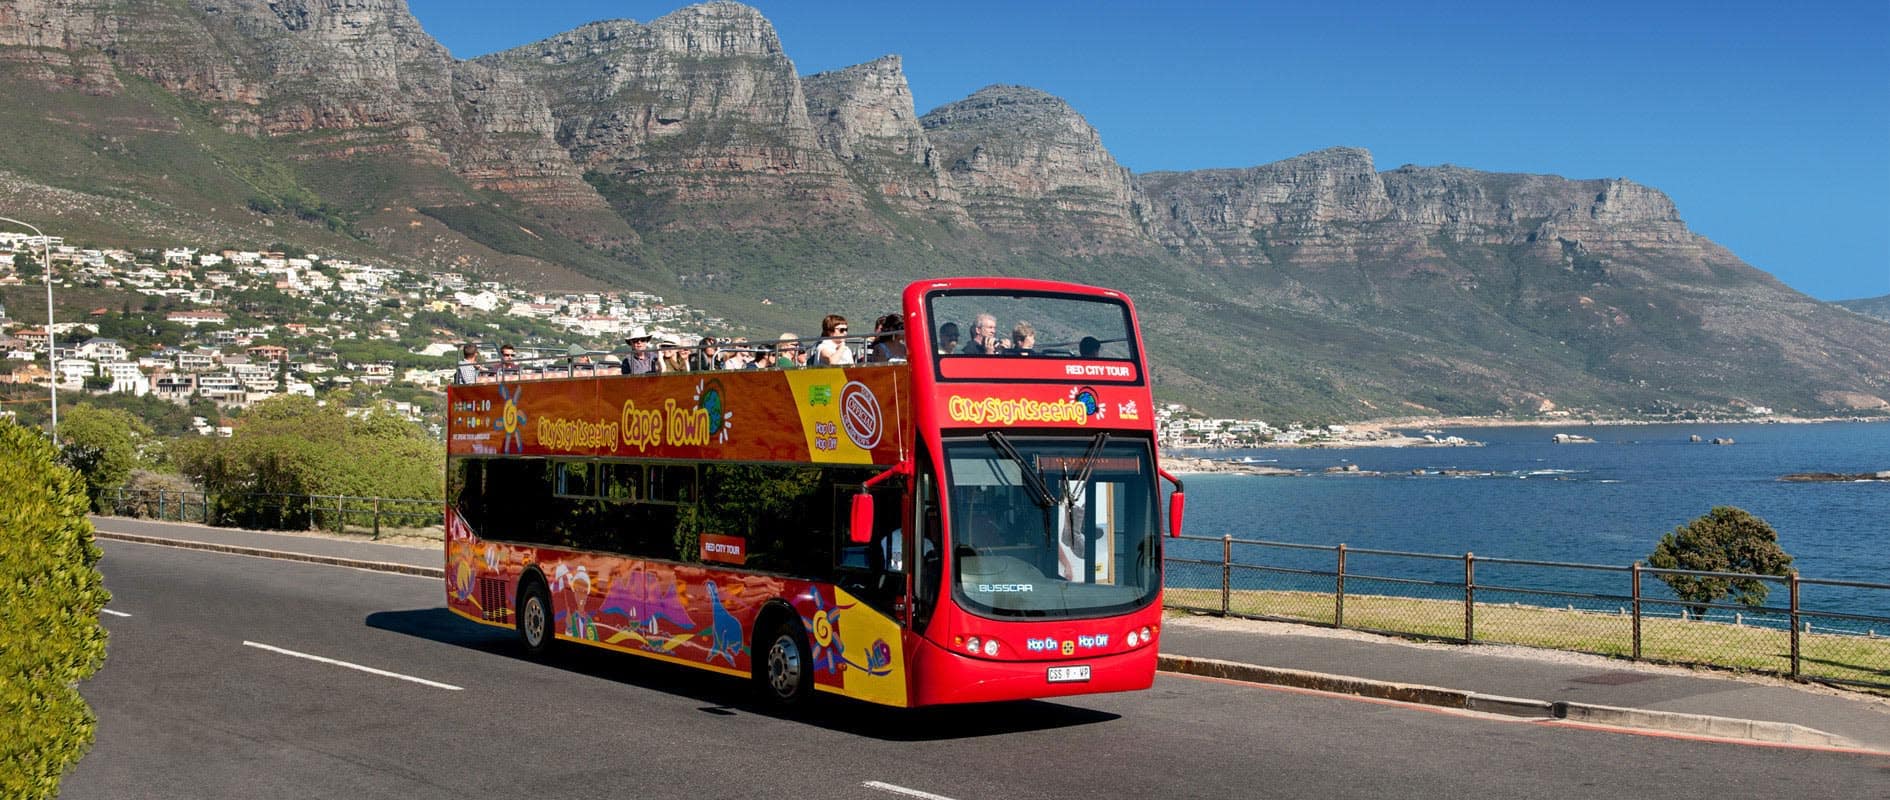 city sightseeing tour bus